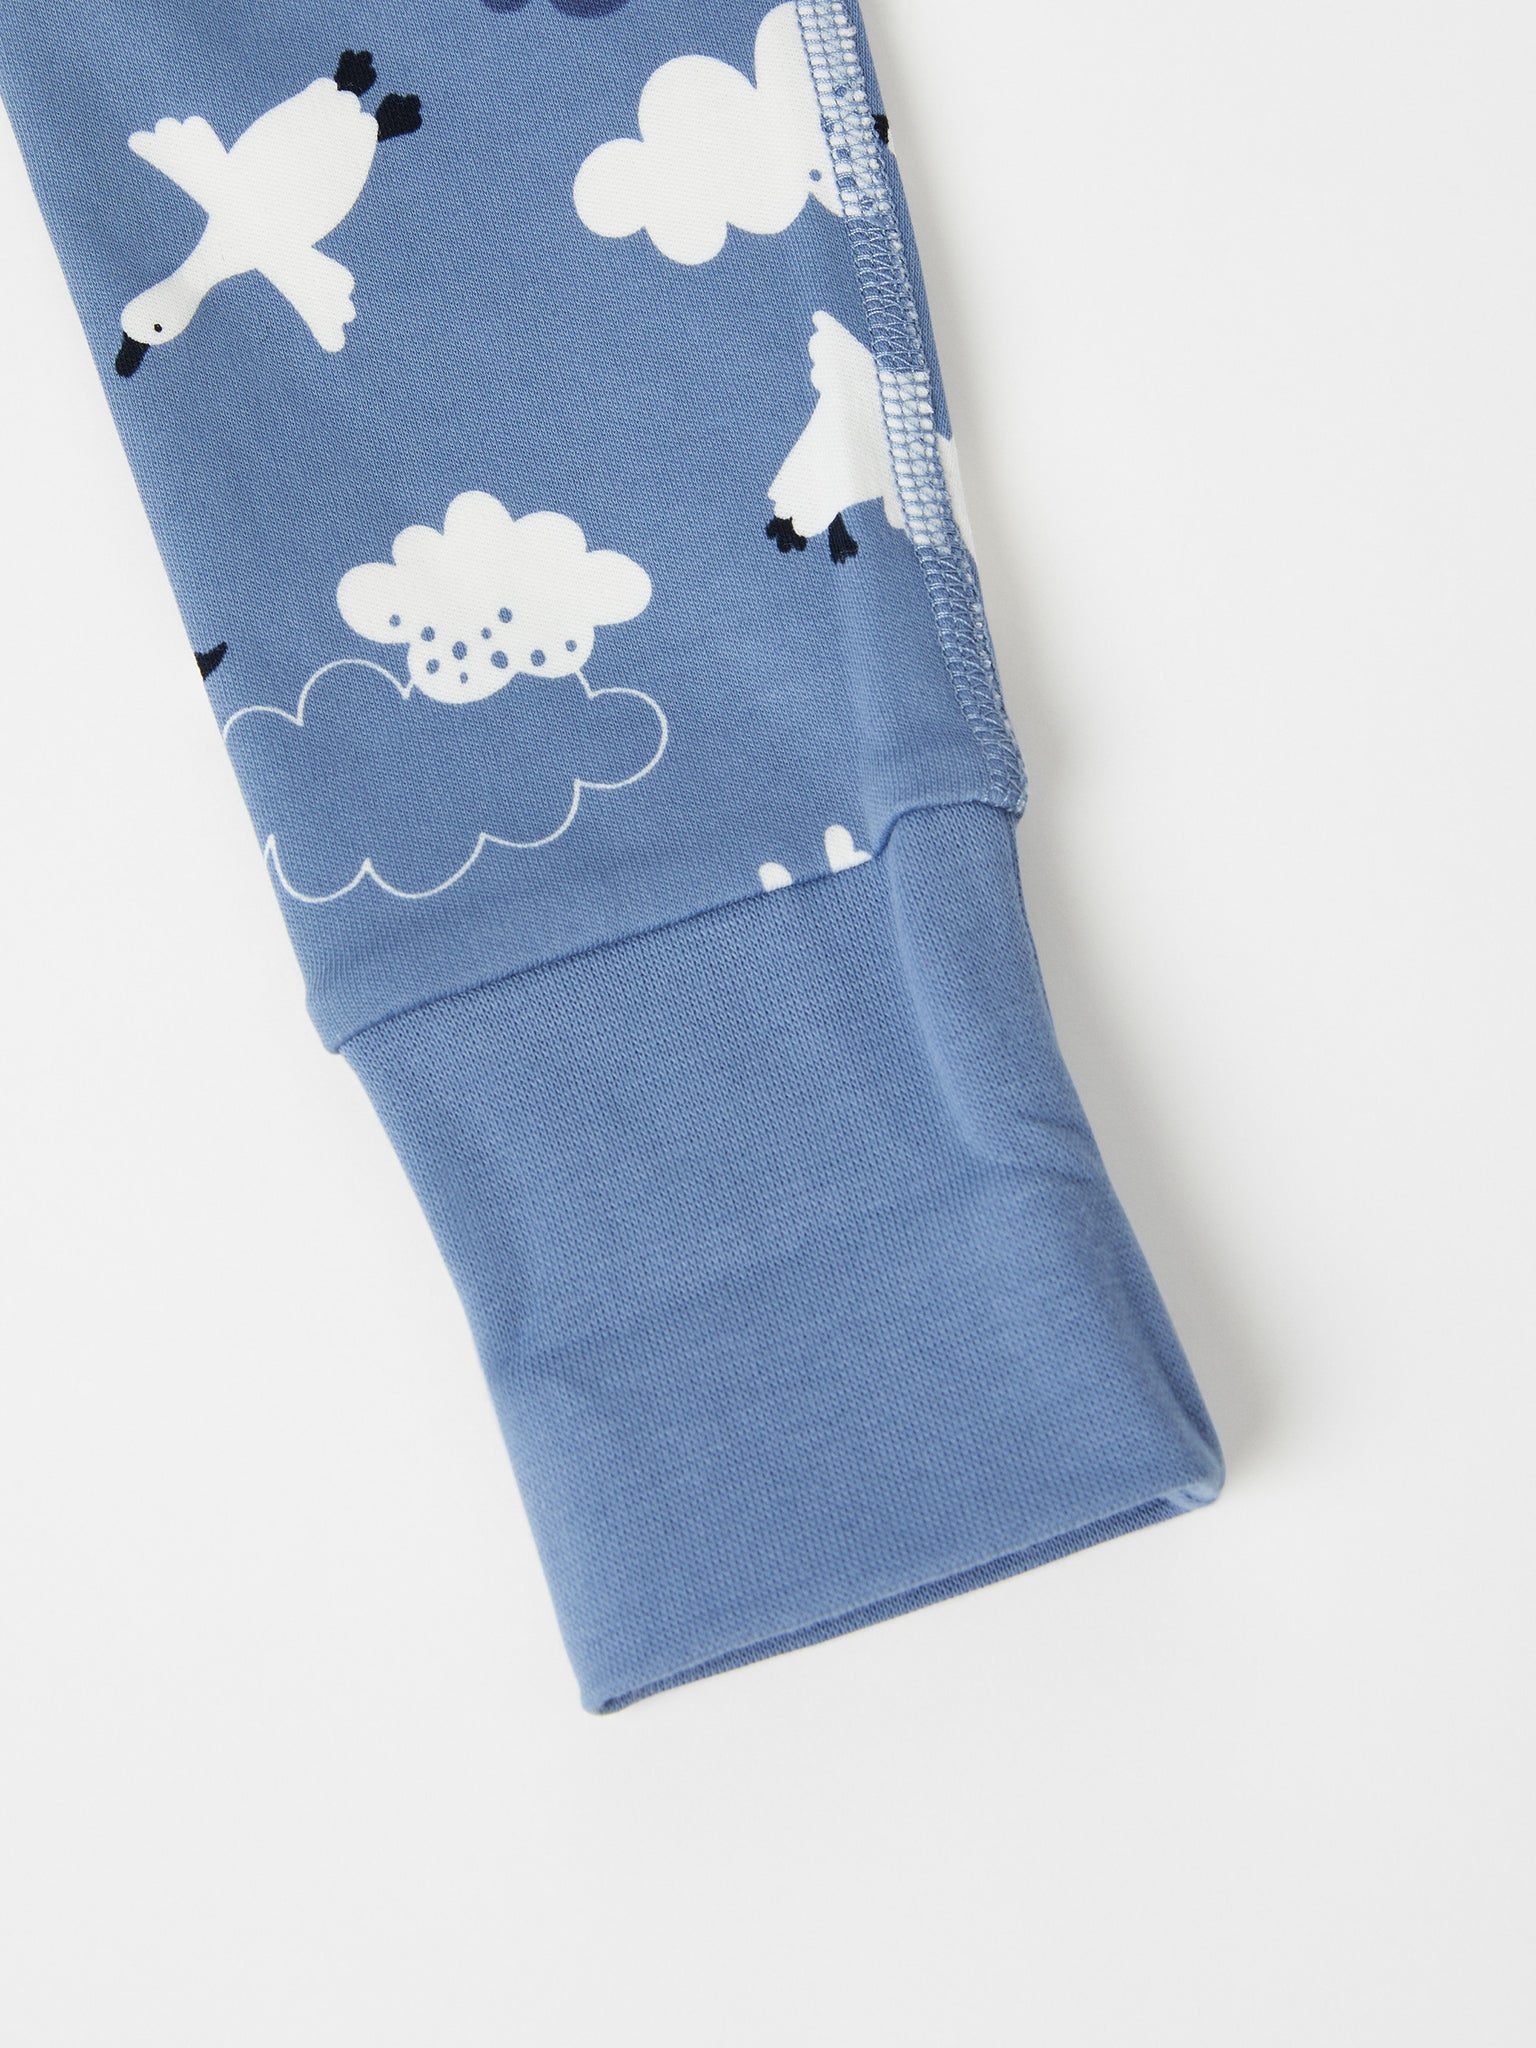 Bird Print Organic Cotton Babygrow from the Polarn O. Pyret baby collection. Nordic baby clothes made from sustainable sources.